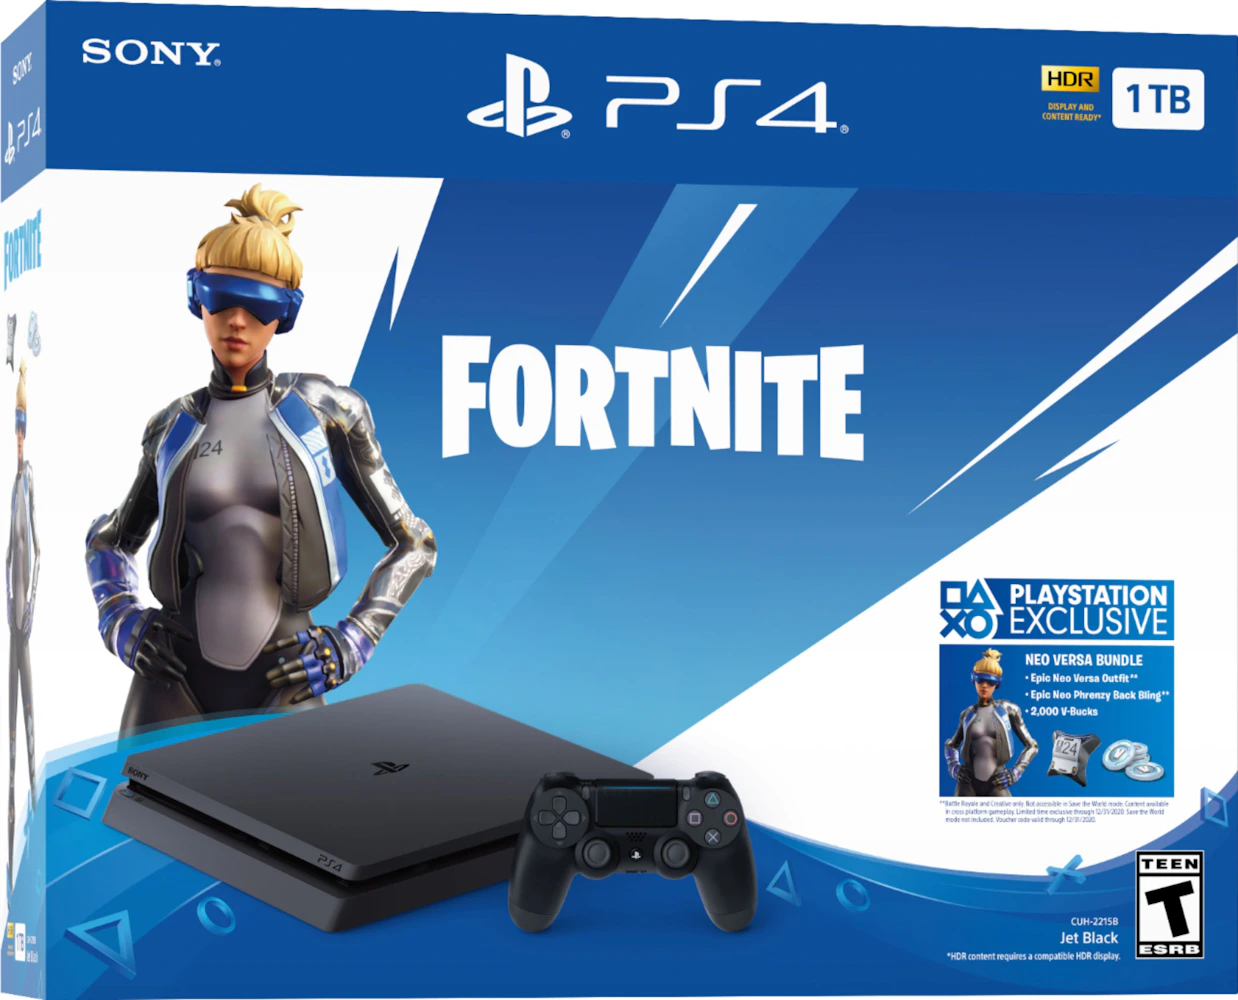 https://images.stockx.com/images/Sony-Playstation-PS4-Pro-1TB-Fortnite-Neo-Versa-Console-Bundle-3004673-2.jpg?fit=fill&bg=FFFFFF&w=700&h=500&fm=webp&auto=compress&q=90&dpr=2&trim=color&updated_at=1652731317?height=78&width=78